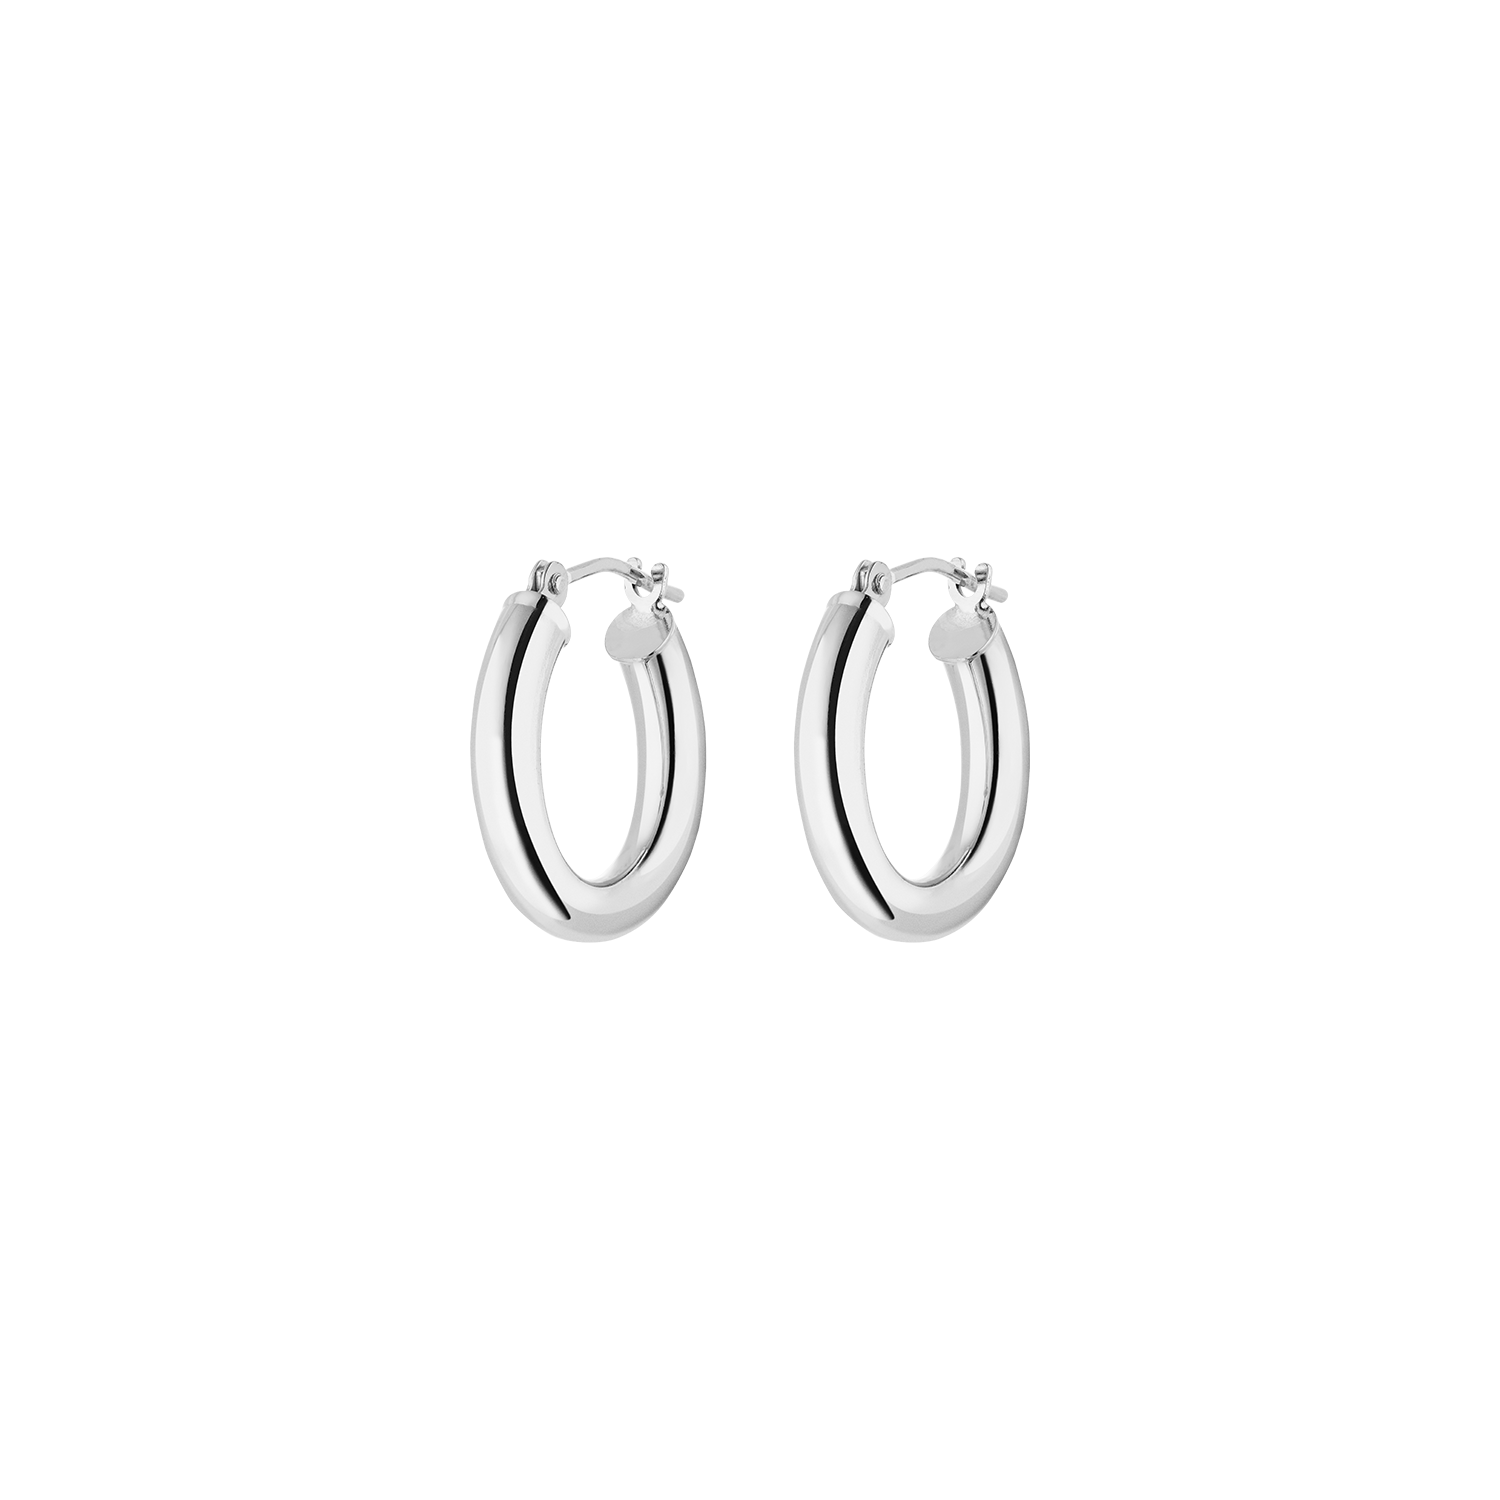 Nina Kastens_Essential White Gold Hoops Small_web